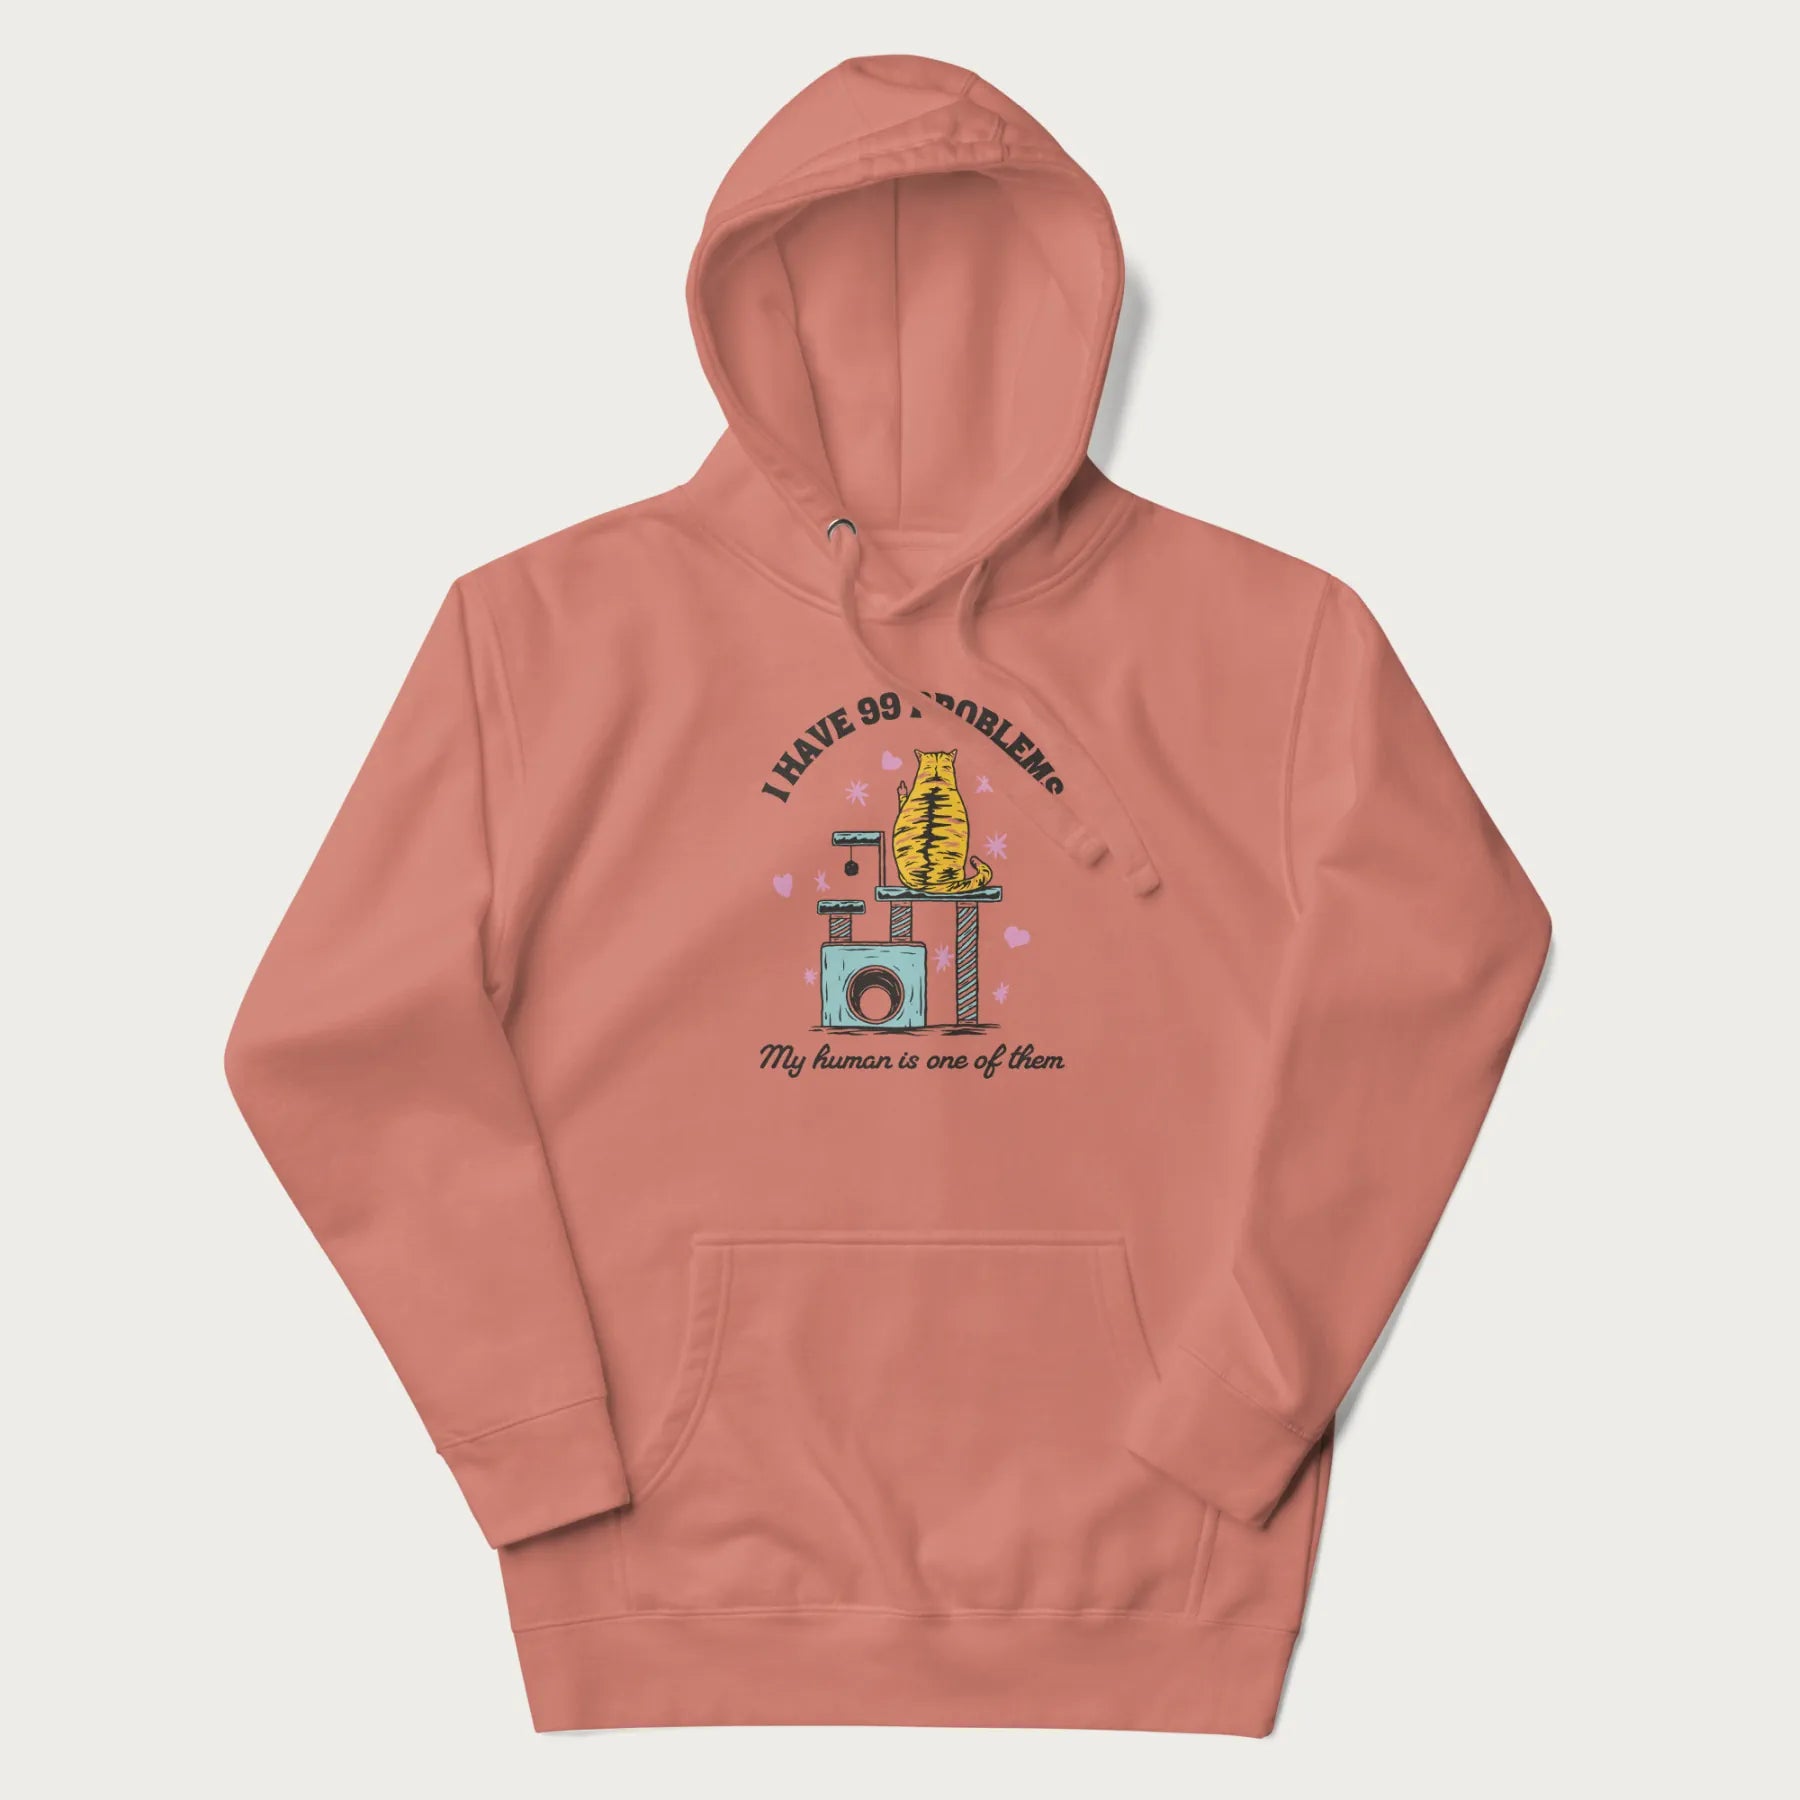 Light pink hoodie with graphic of a cat on a scratching post and text 'i have 99 problems, my human is one of them'.